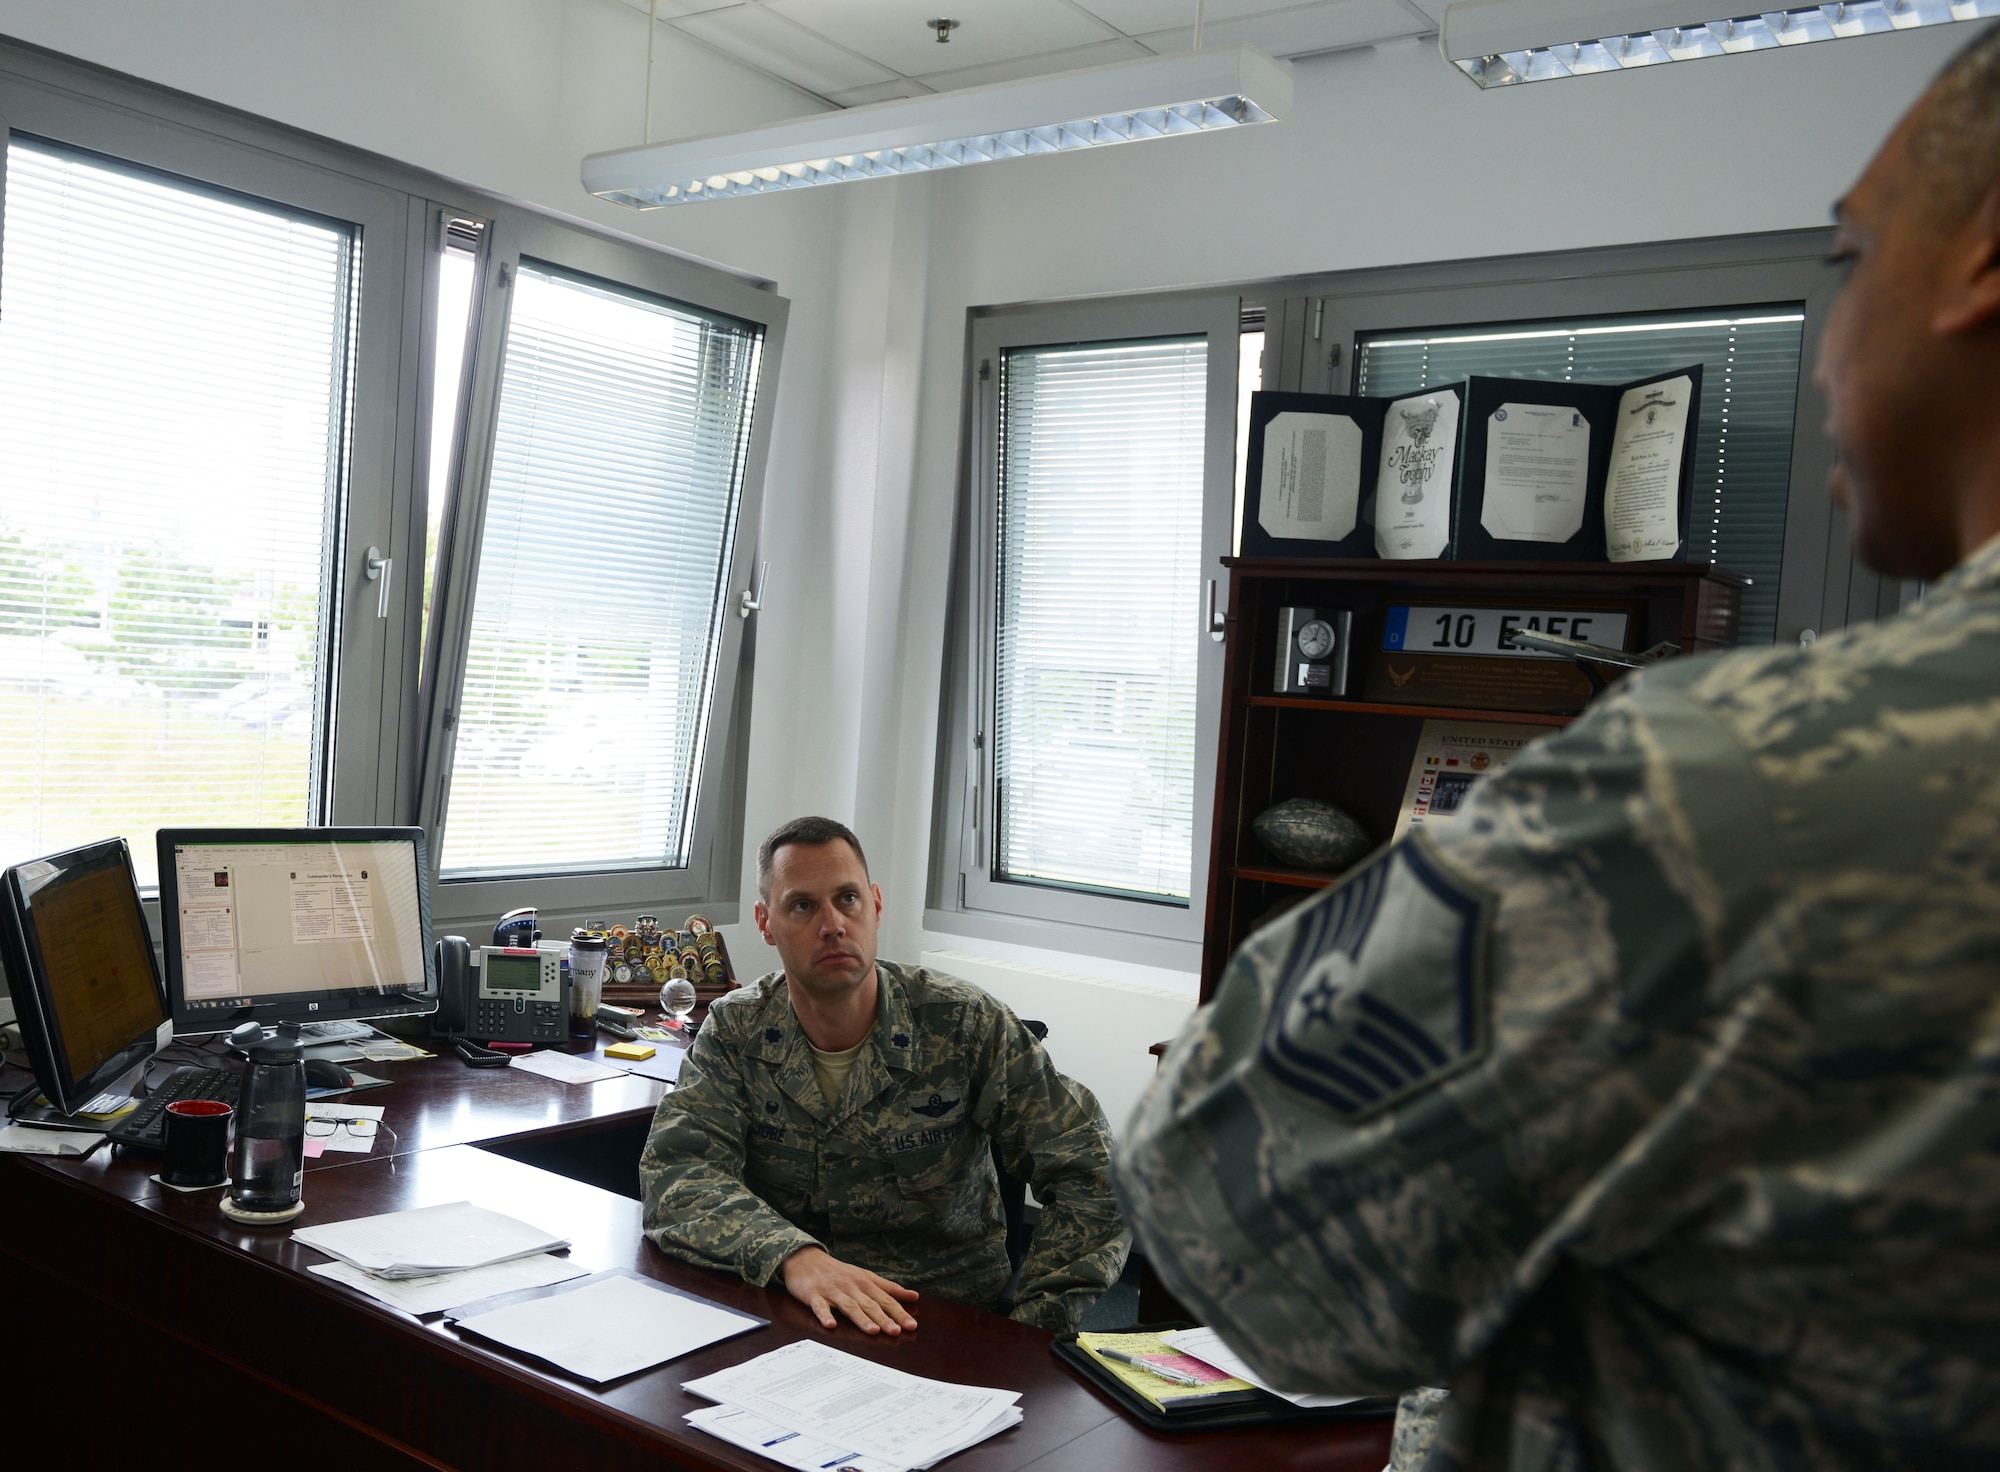 Lt. Col. Lucas Jobe, 313th Expeditionary Operations Support Squadron commander, receives a briefing from Master Sgt. Robert McNeal, 313th EOSS superintendent, at Ramstein Air Base, Germany, June 21, 2016. The 313th EOSS supports Air Mobility Command aircrew transiting through Ramstein en route to deployed locations. (U.S.  Air Force photo/ Airman 1st Class Joshua Magbanua)
 
